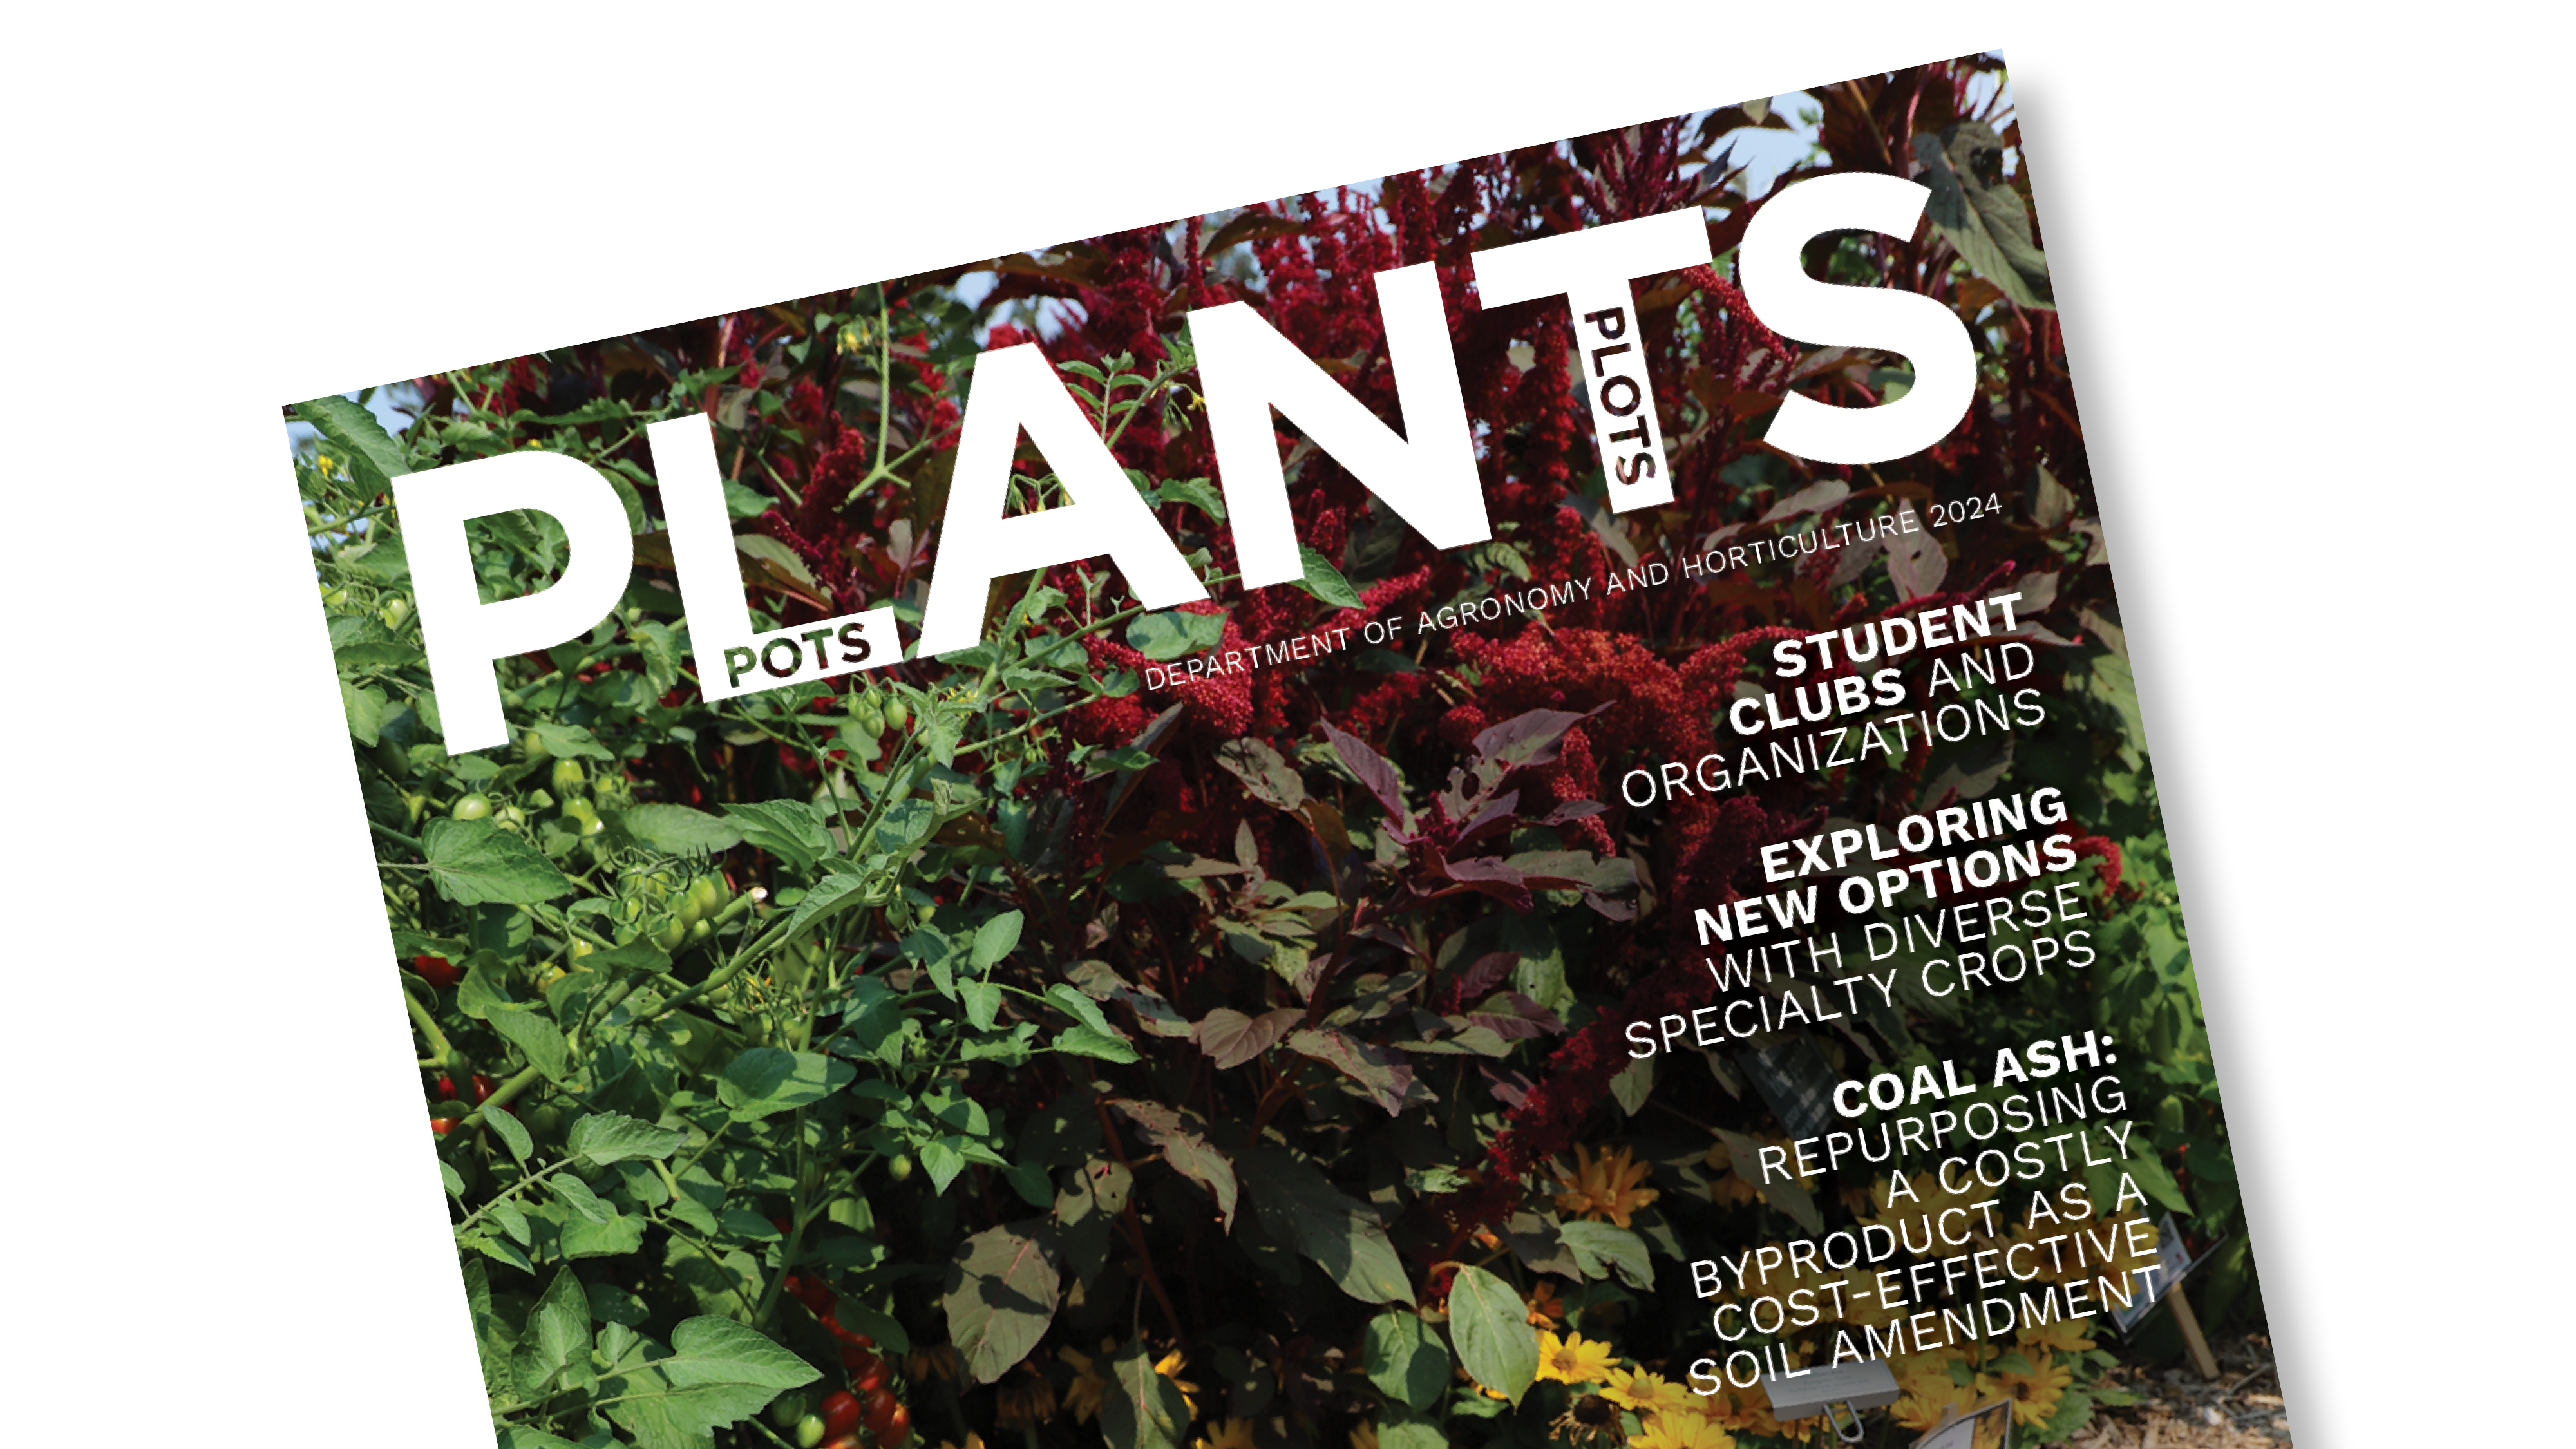 The 2024 Pots Plots and Plants newsletter was published in April and is available online.